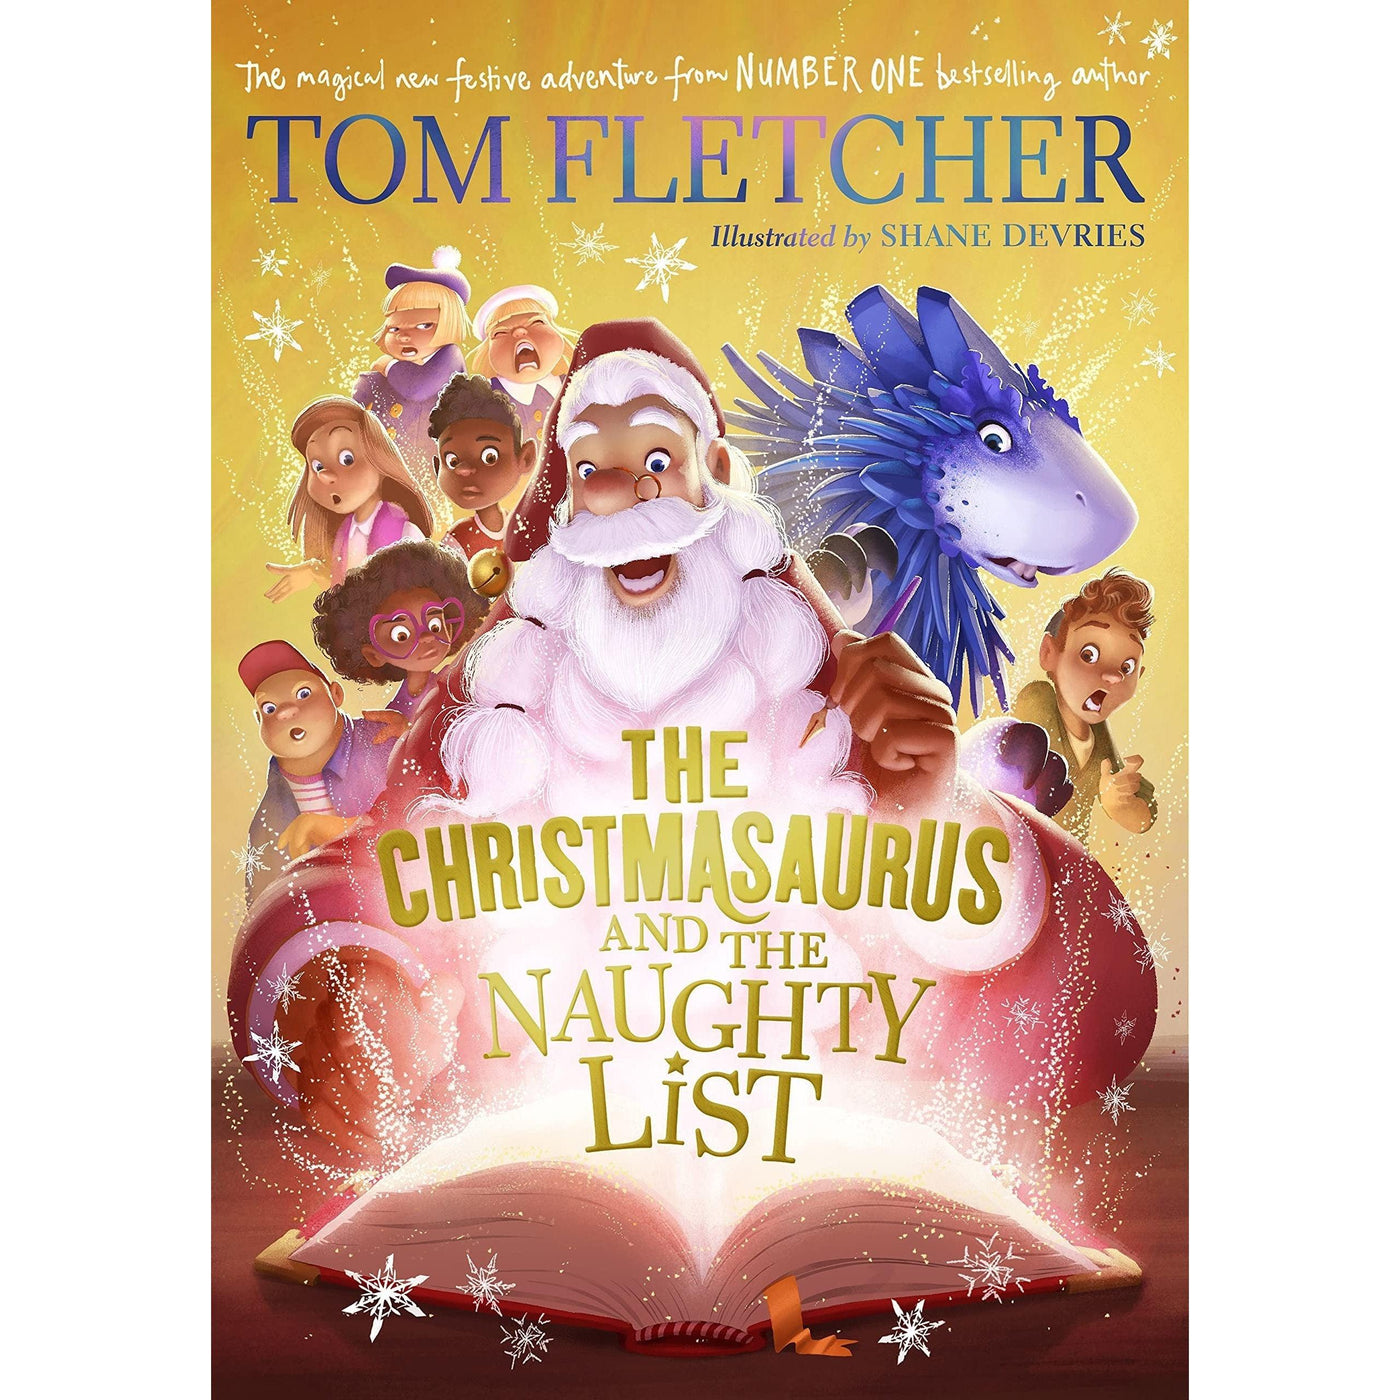 The Christmasaurus And The Naughty List - Tom Fletcher & Shane Devries